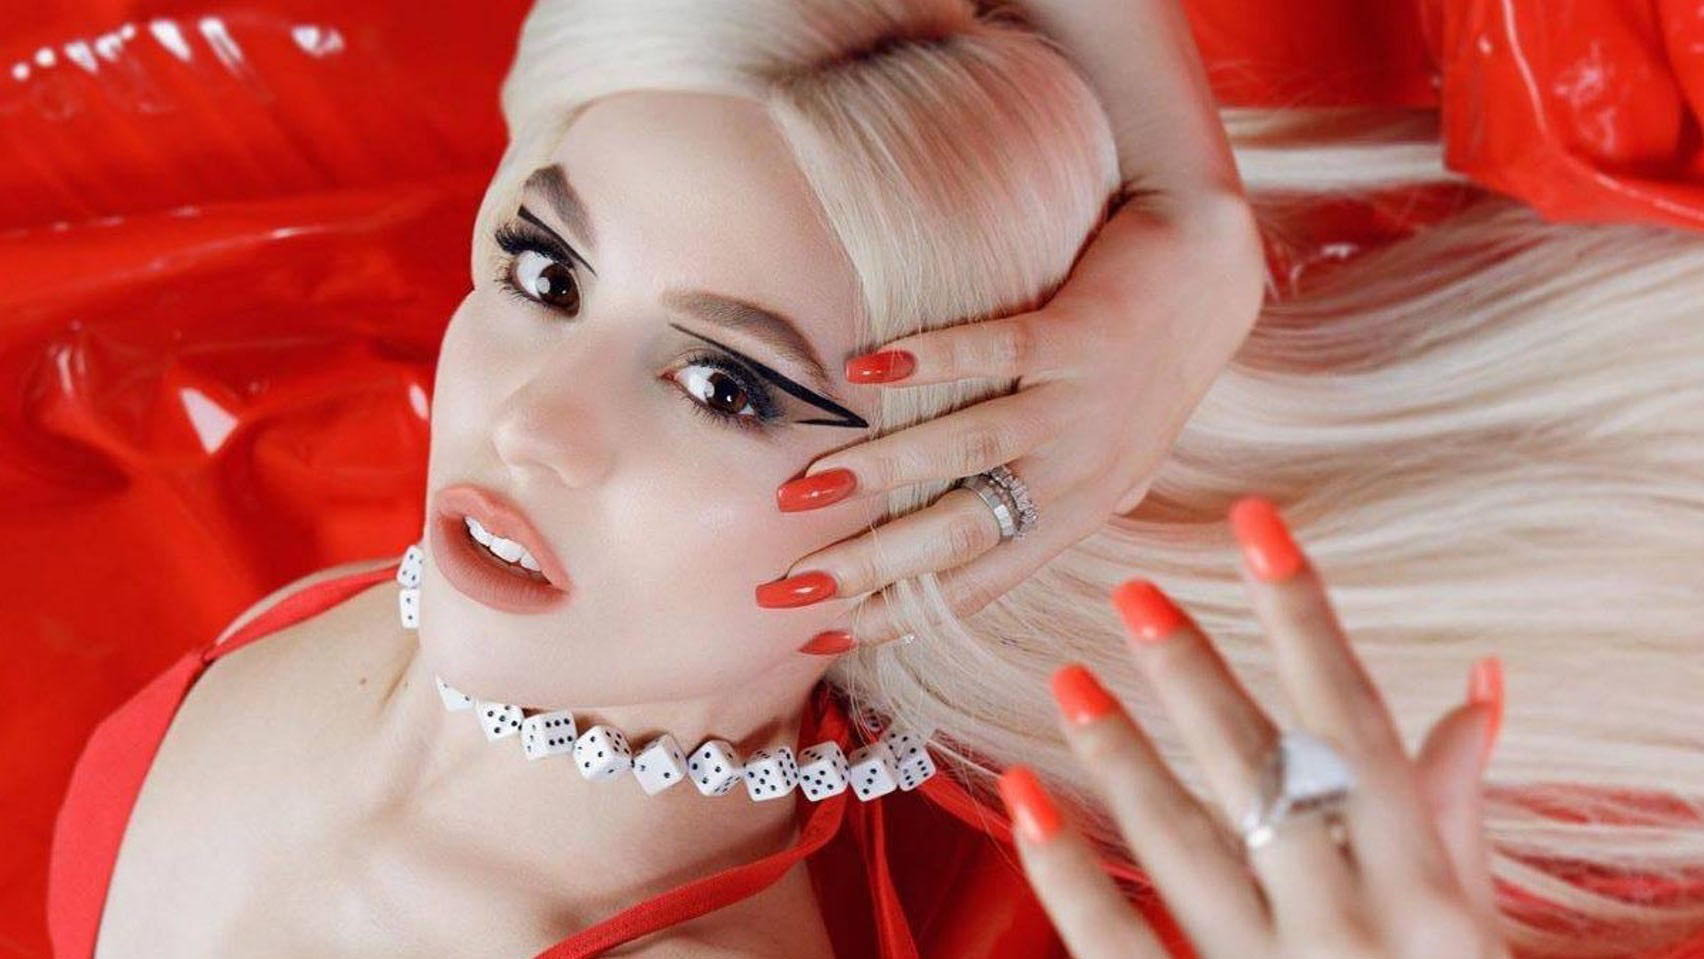 Amanda Ava Koci (born Amanda Koci; February 16, 1994), known professionally as Ava Max, is an American singer and songwriter. After moving from severa...